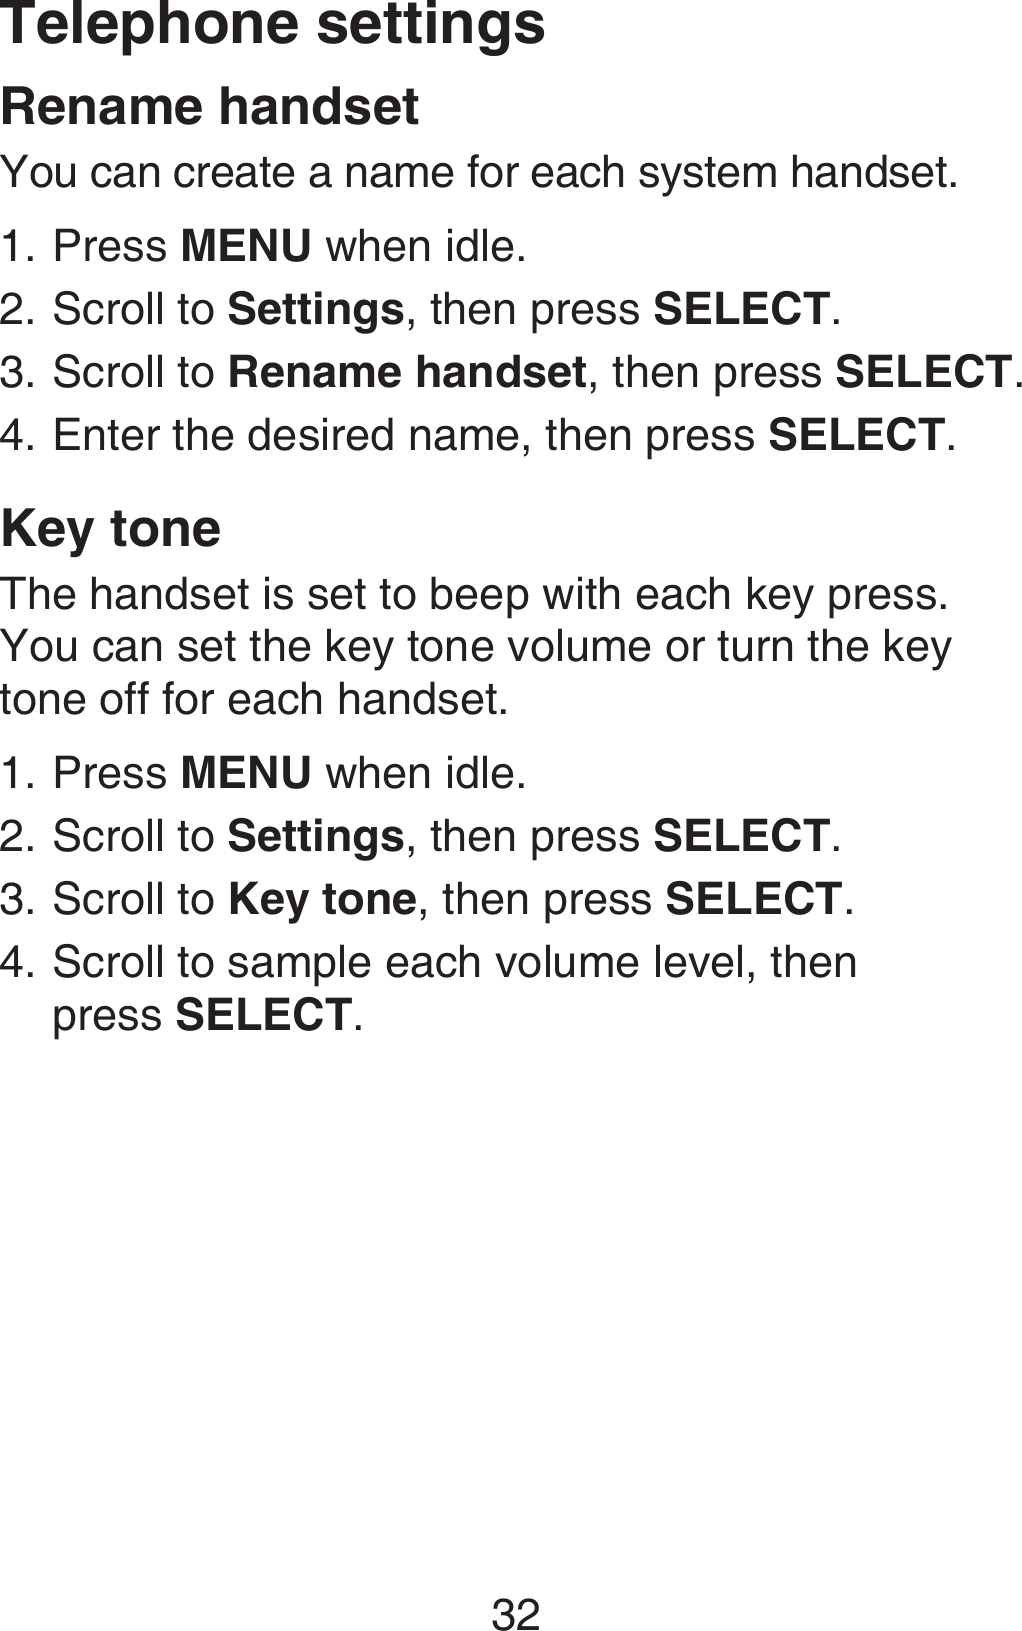 32Telephone settingsRename handsetYou can create a name for each system handset.Press MENU when idle.Scroll to Settings, then press SELECT.Scroll to Rename handset, then press SELECT.Enter the desired name, then press SELECT.Key toneThe handset is set to beep with each key press. You can set the key tone volume or turn the key tone off for each handset.Press MENU when idle.Scroll to Settings, then press SELECT.Scroll to Key tone, then press SELECT.Scroll to sample each volume level, then  press SELECT.1.2.3.4.1.2.3.4.